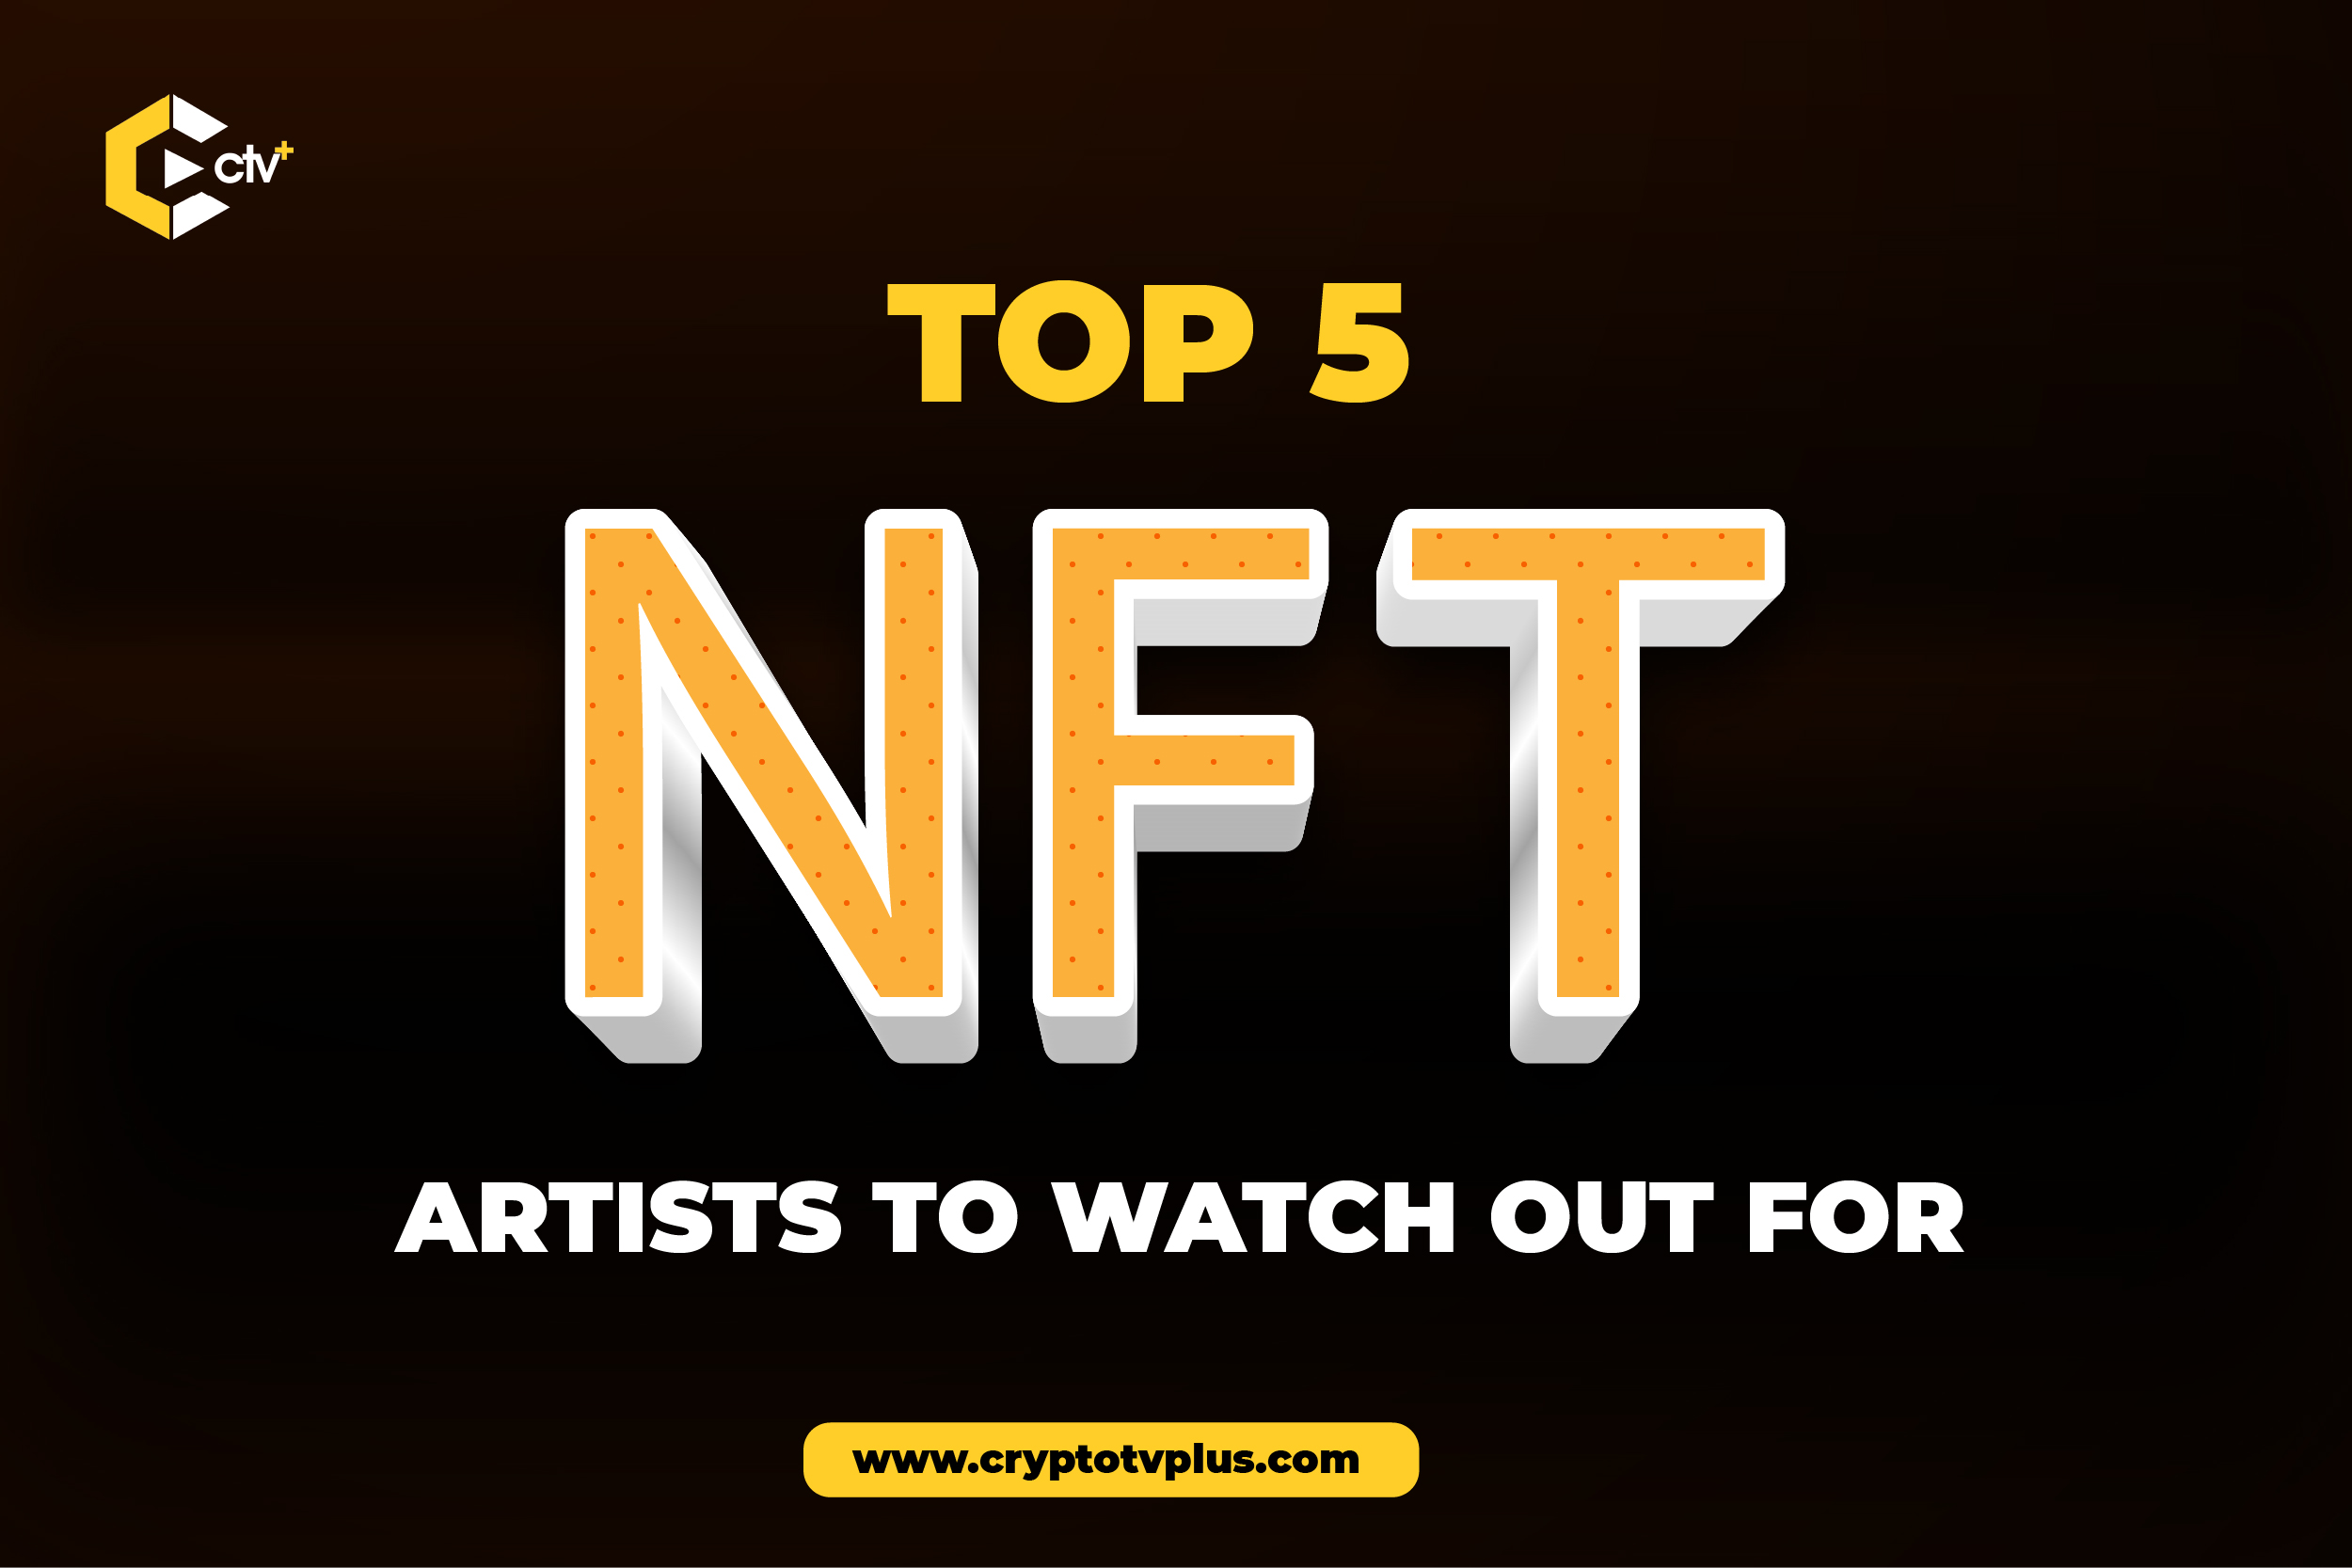 Top 5 NFT Artists to Watch out For

